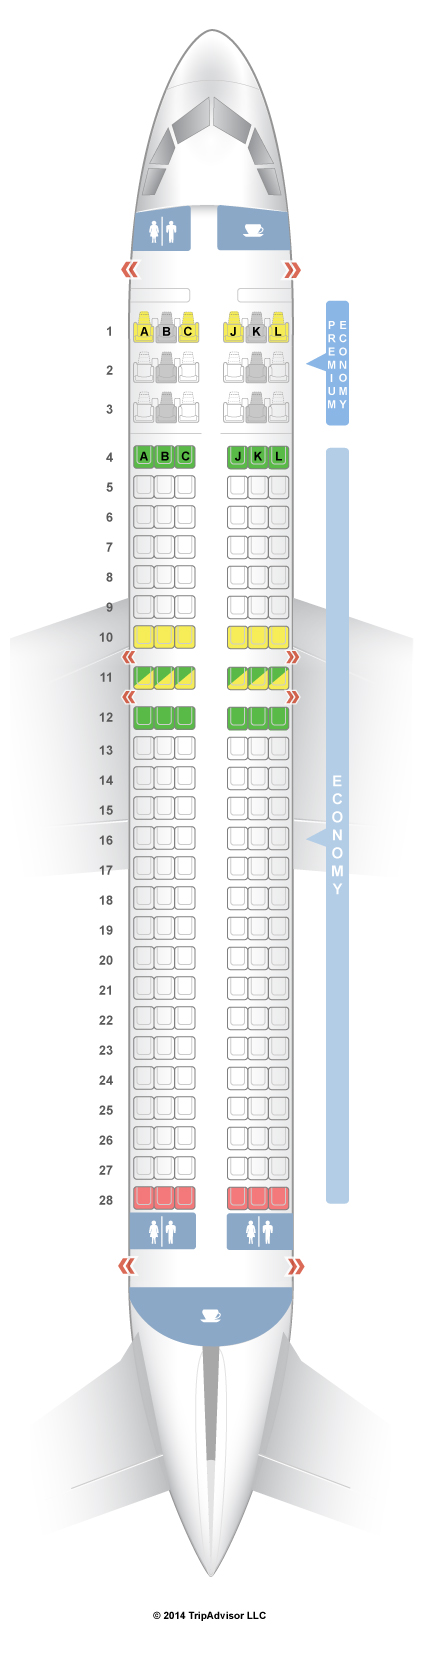 Tam Airlines Seating Chart